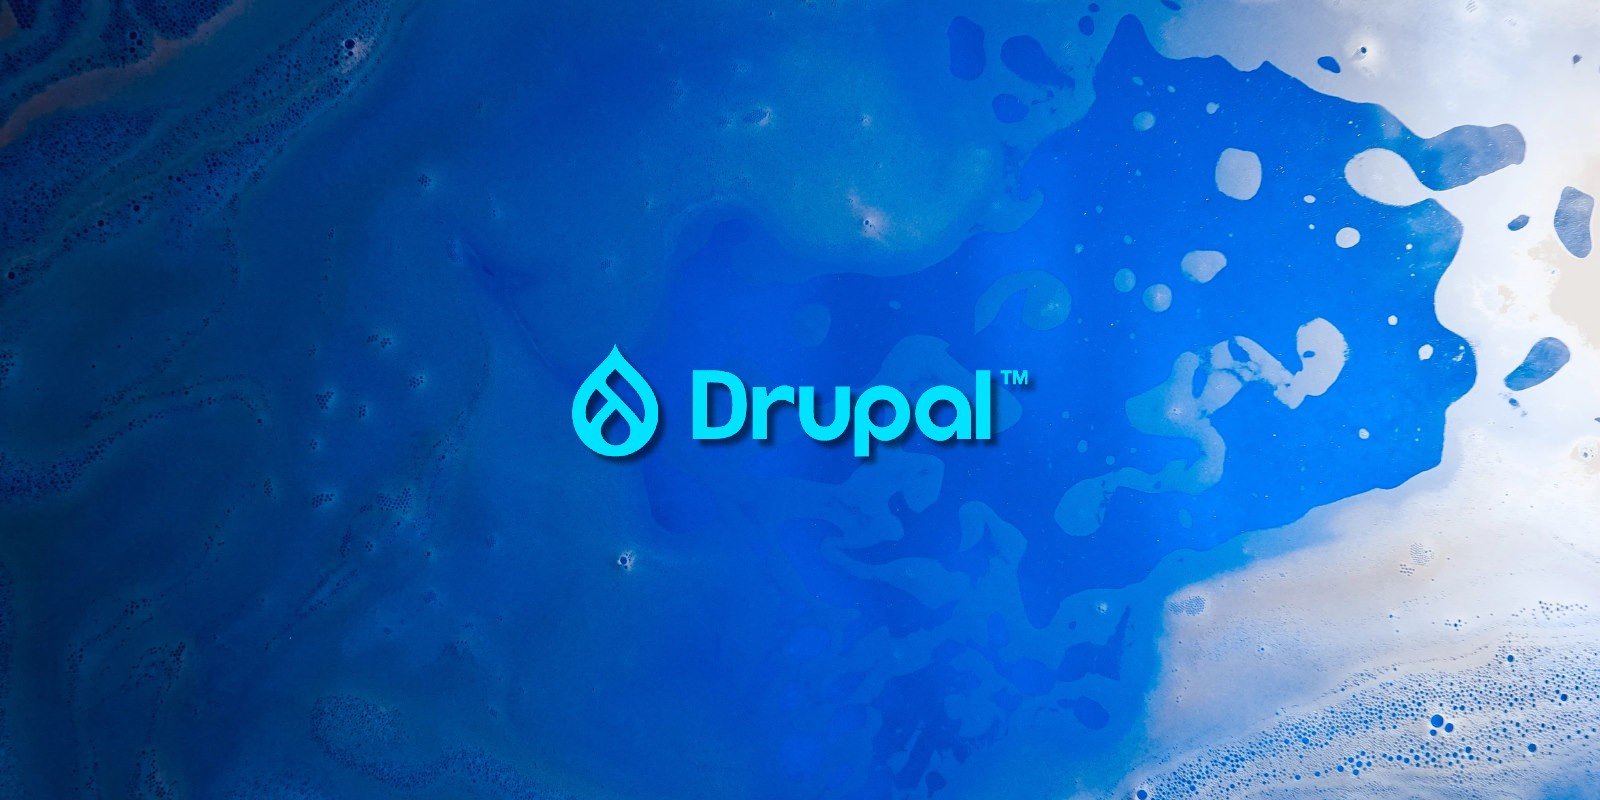 Drupal issues emergency fix for critical bug with known exploits